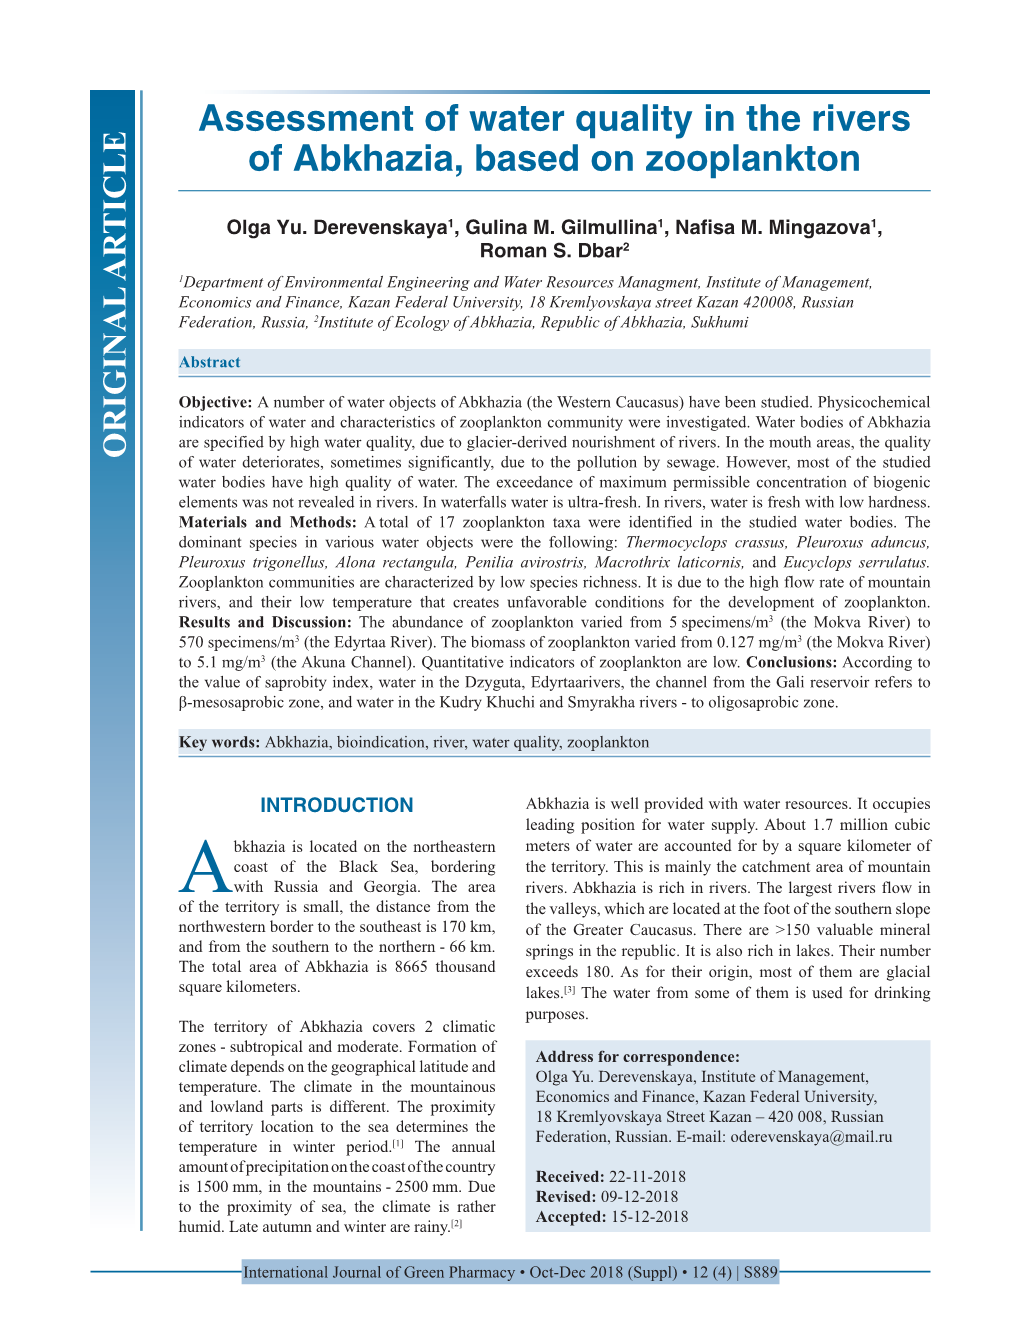 Assessment of Water Quality in the Rivers of Abkhazia, Based on Zooplankton